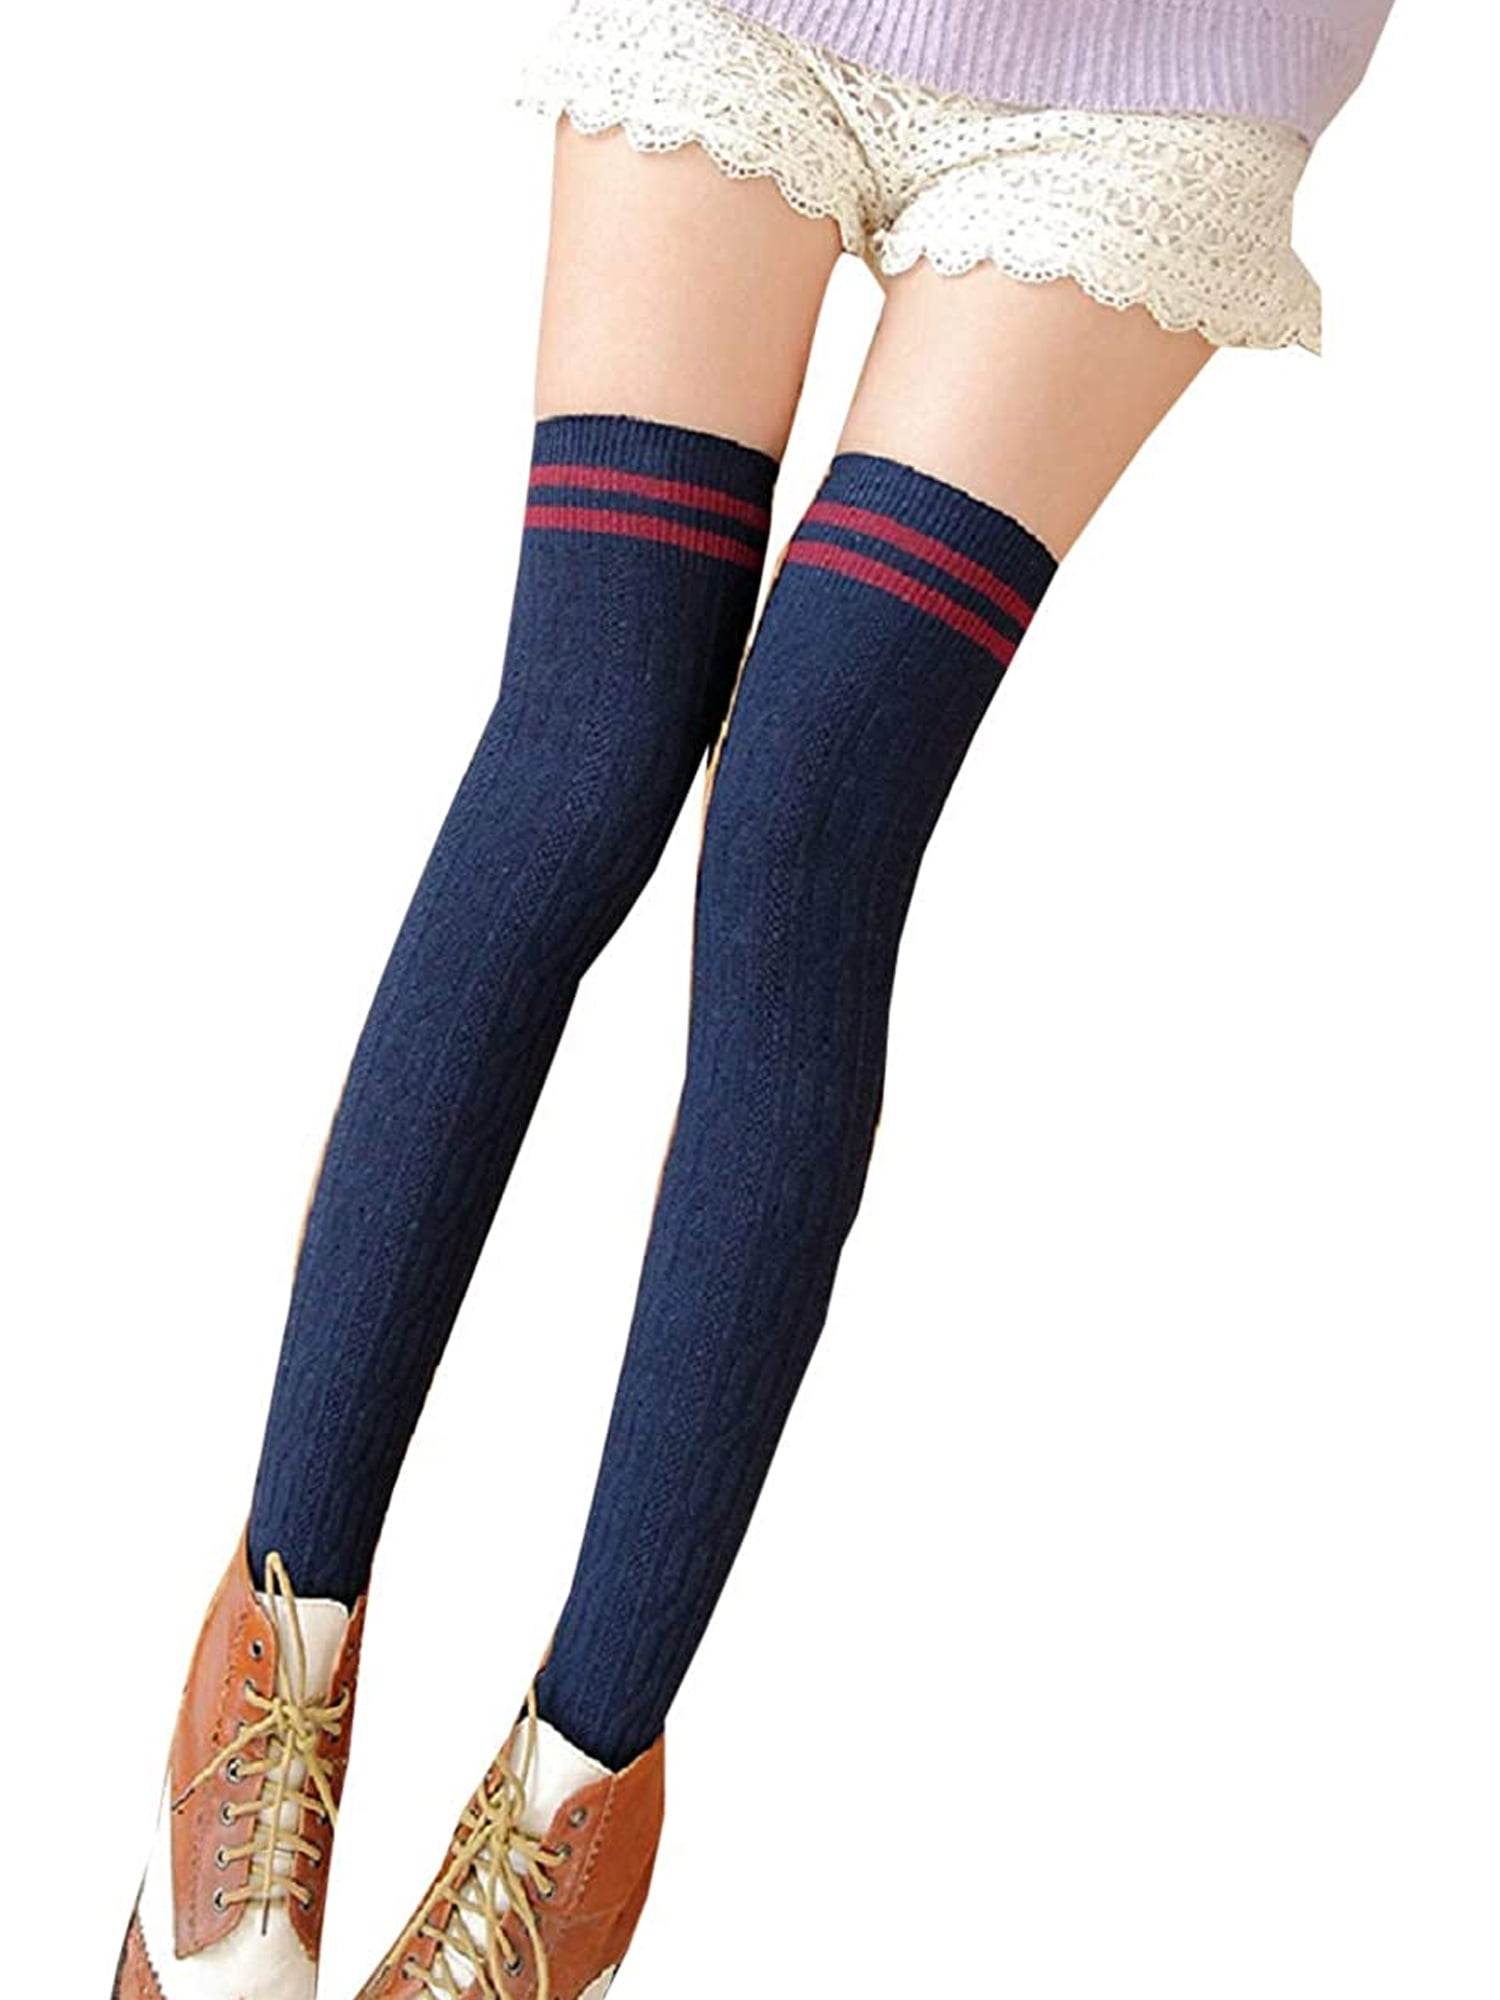 Download Musuos - New Women Knit Cotton Over The Knee Long Socks ...